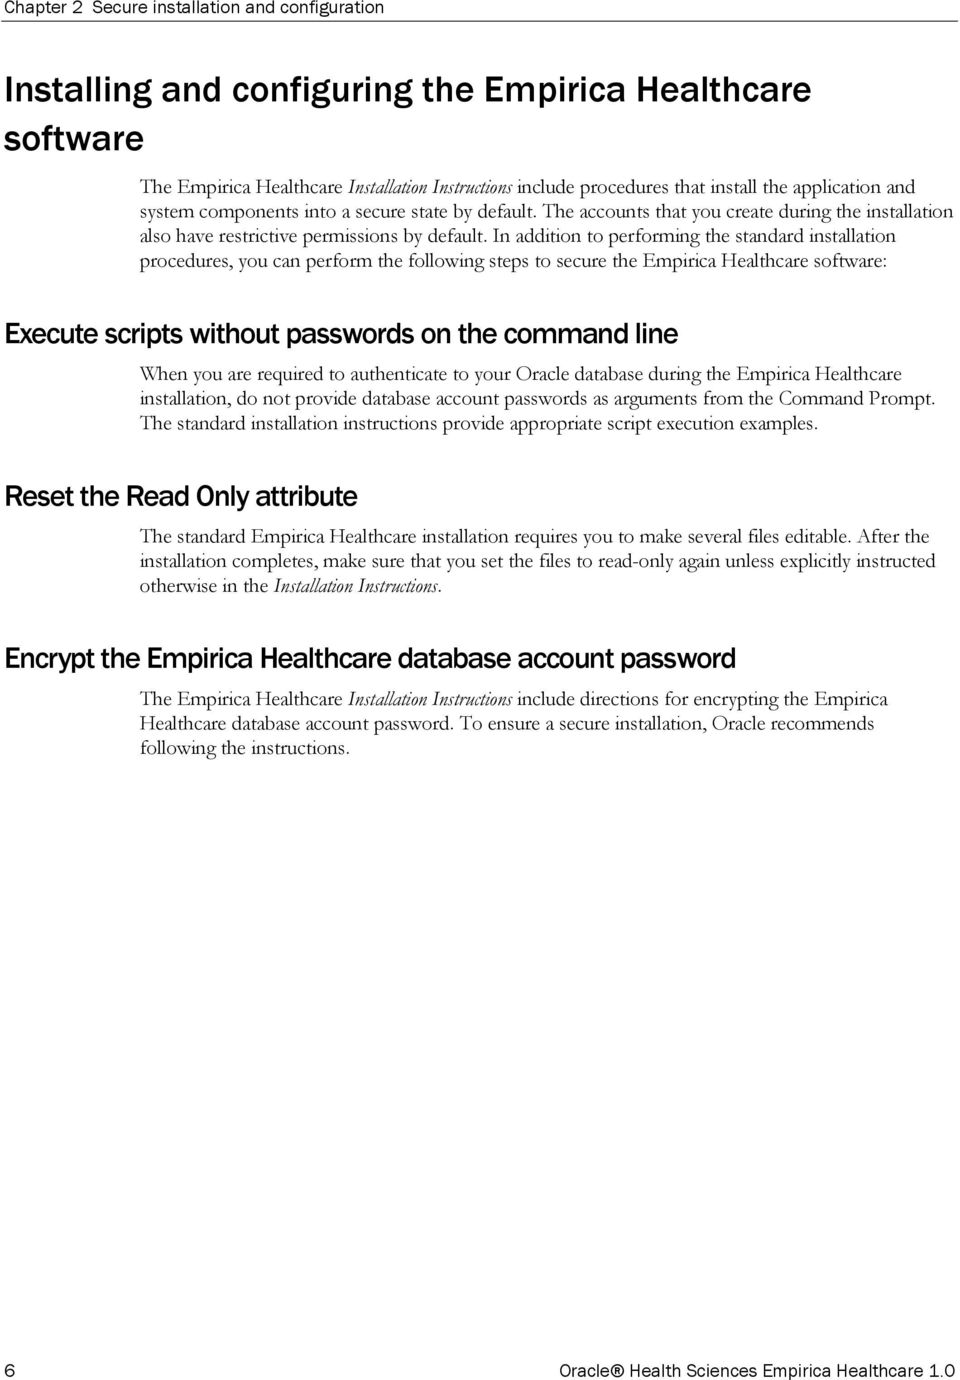 In addition to performing the standard installation procedures, you can perform the following steps to secure the Empirica Healthcare software: Execute scripts without passwords on the command line